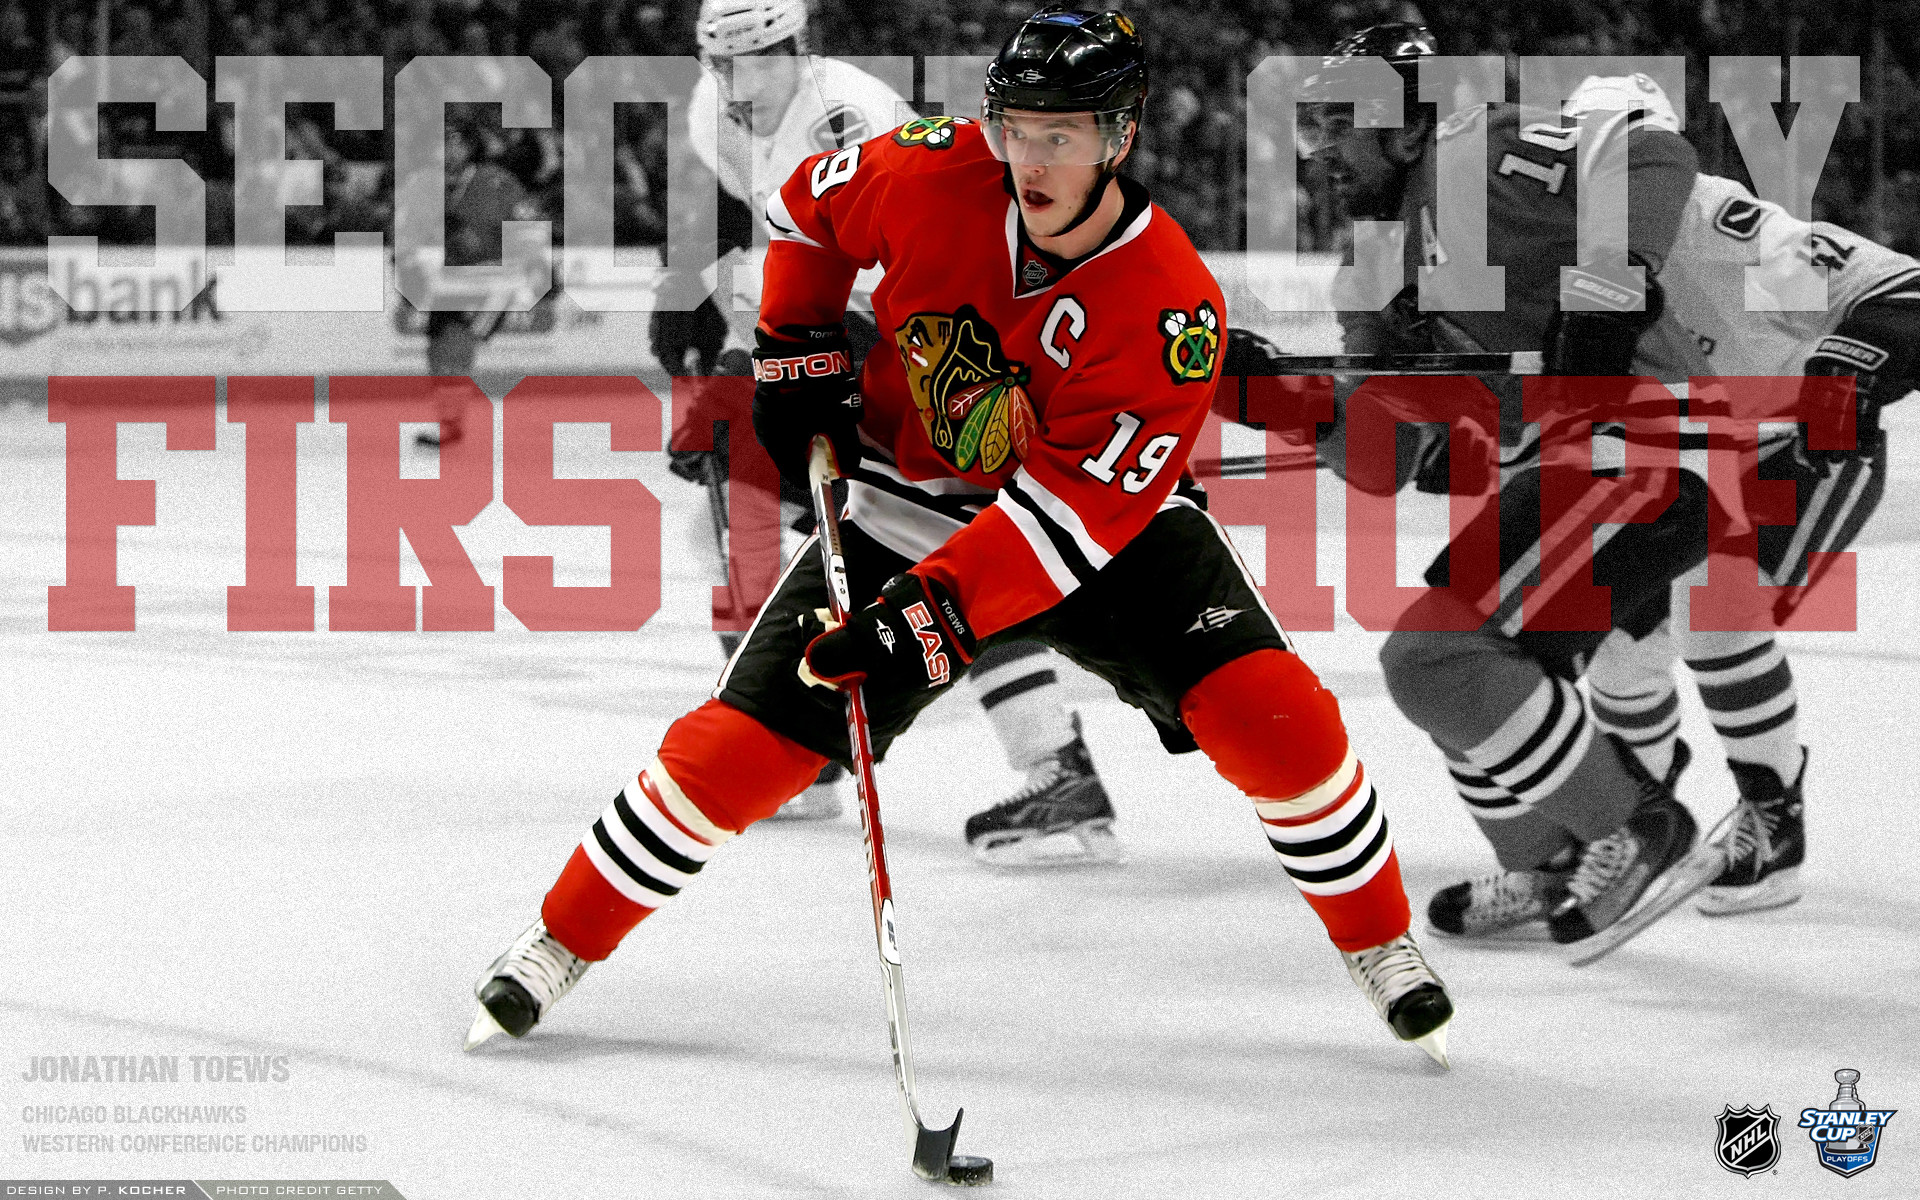 1920x1200 Hockey - photo wallpapers, hockey players pictures / Page 23